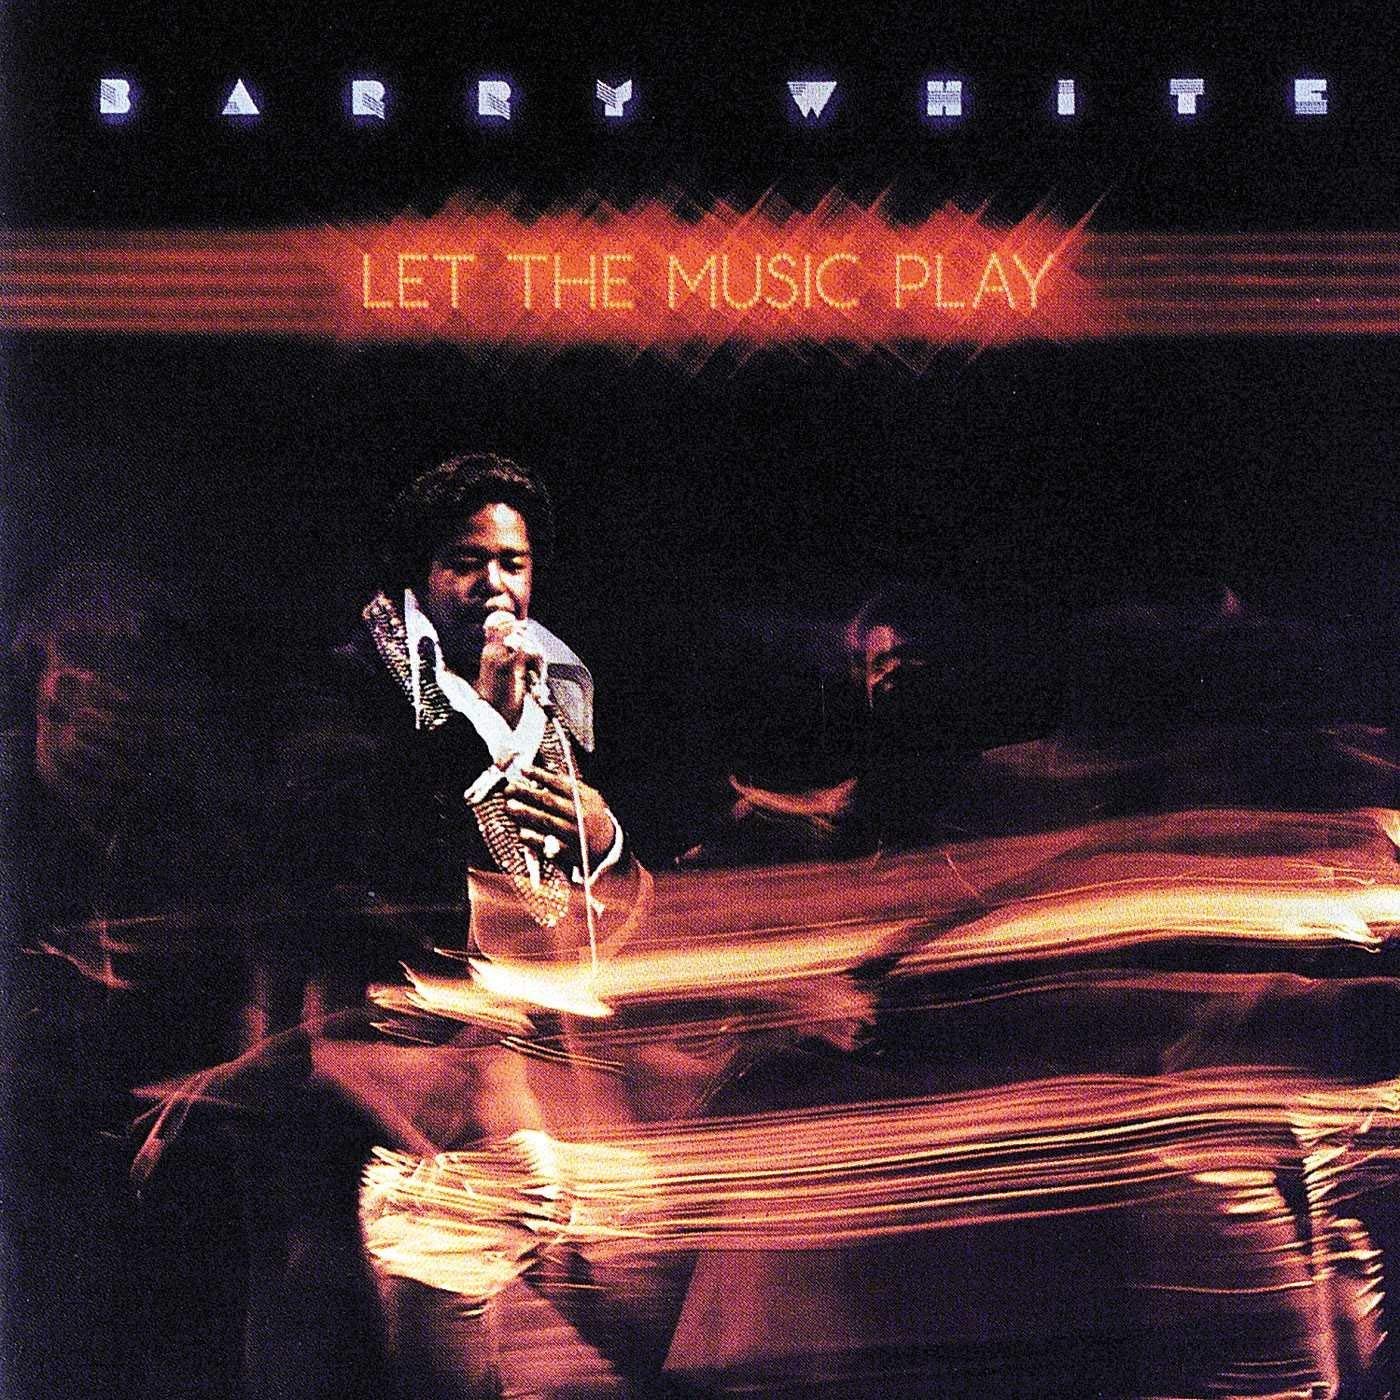 CD Shop - WHITE BARRY LET THE MUSIC PLAY